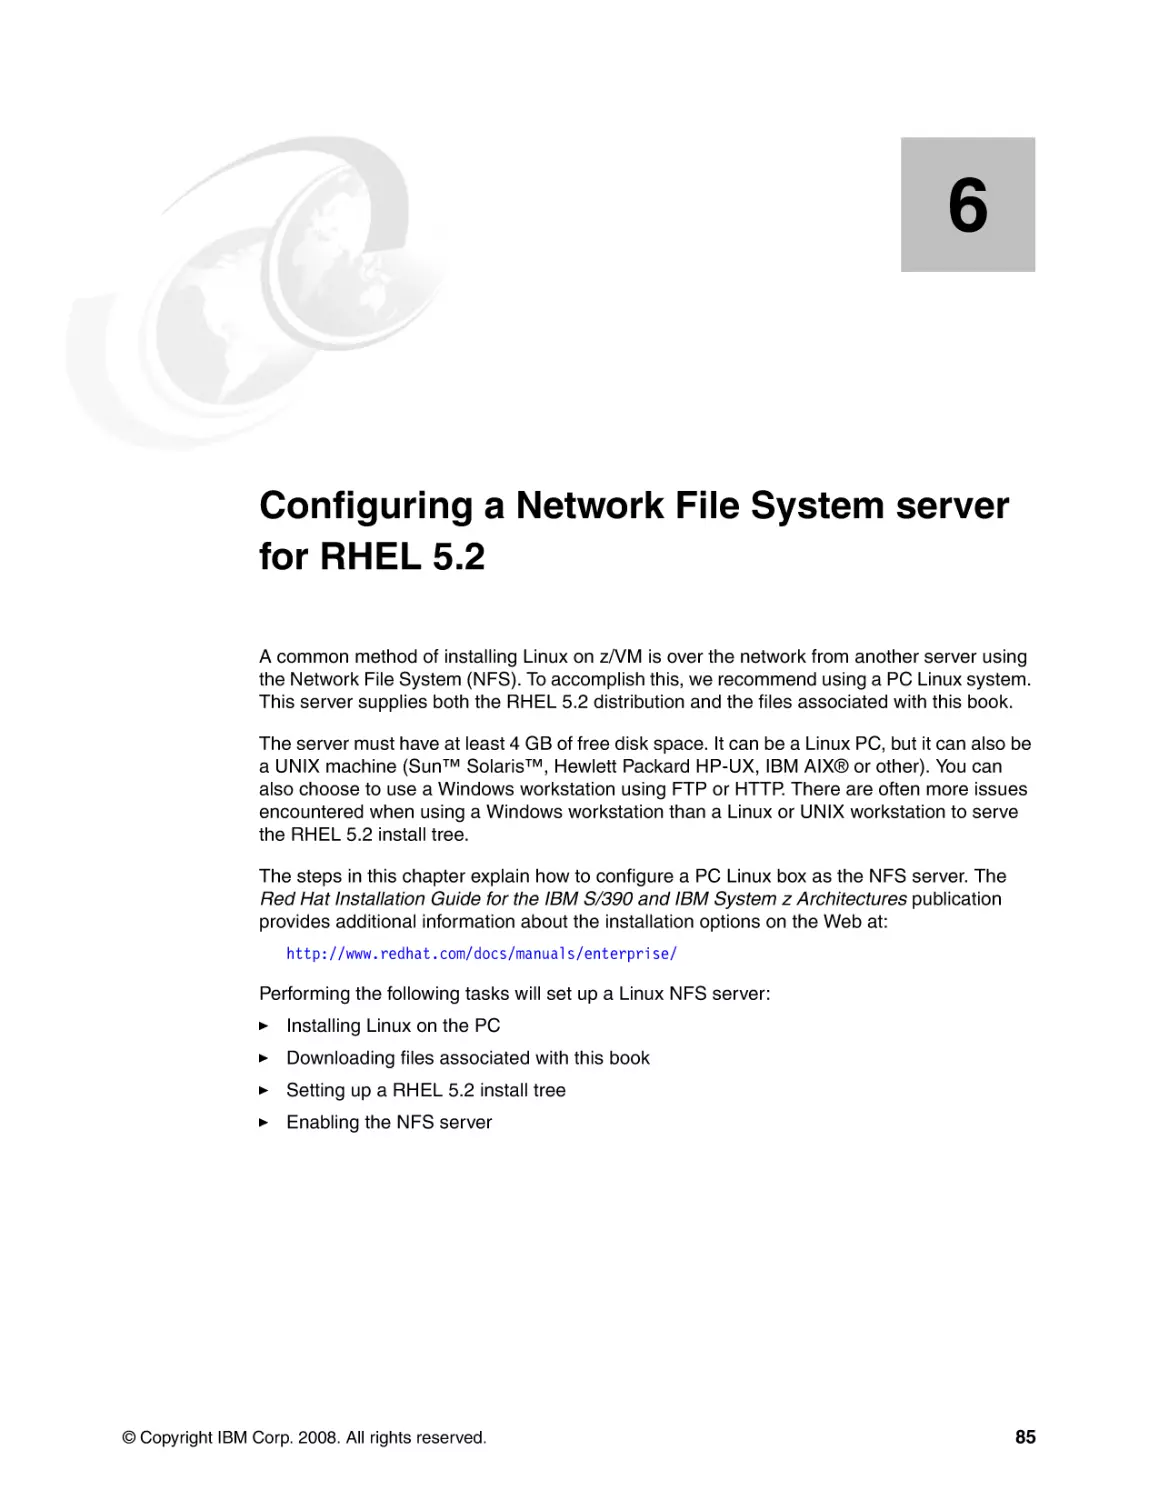 Chapter 6. Configuring a Network File System server for RHEL 5.2